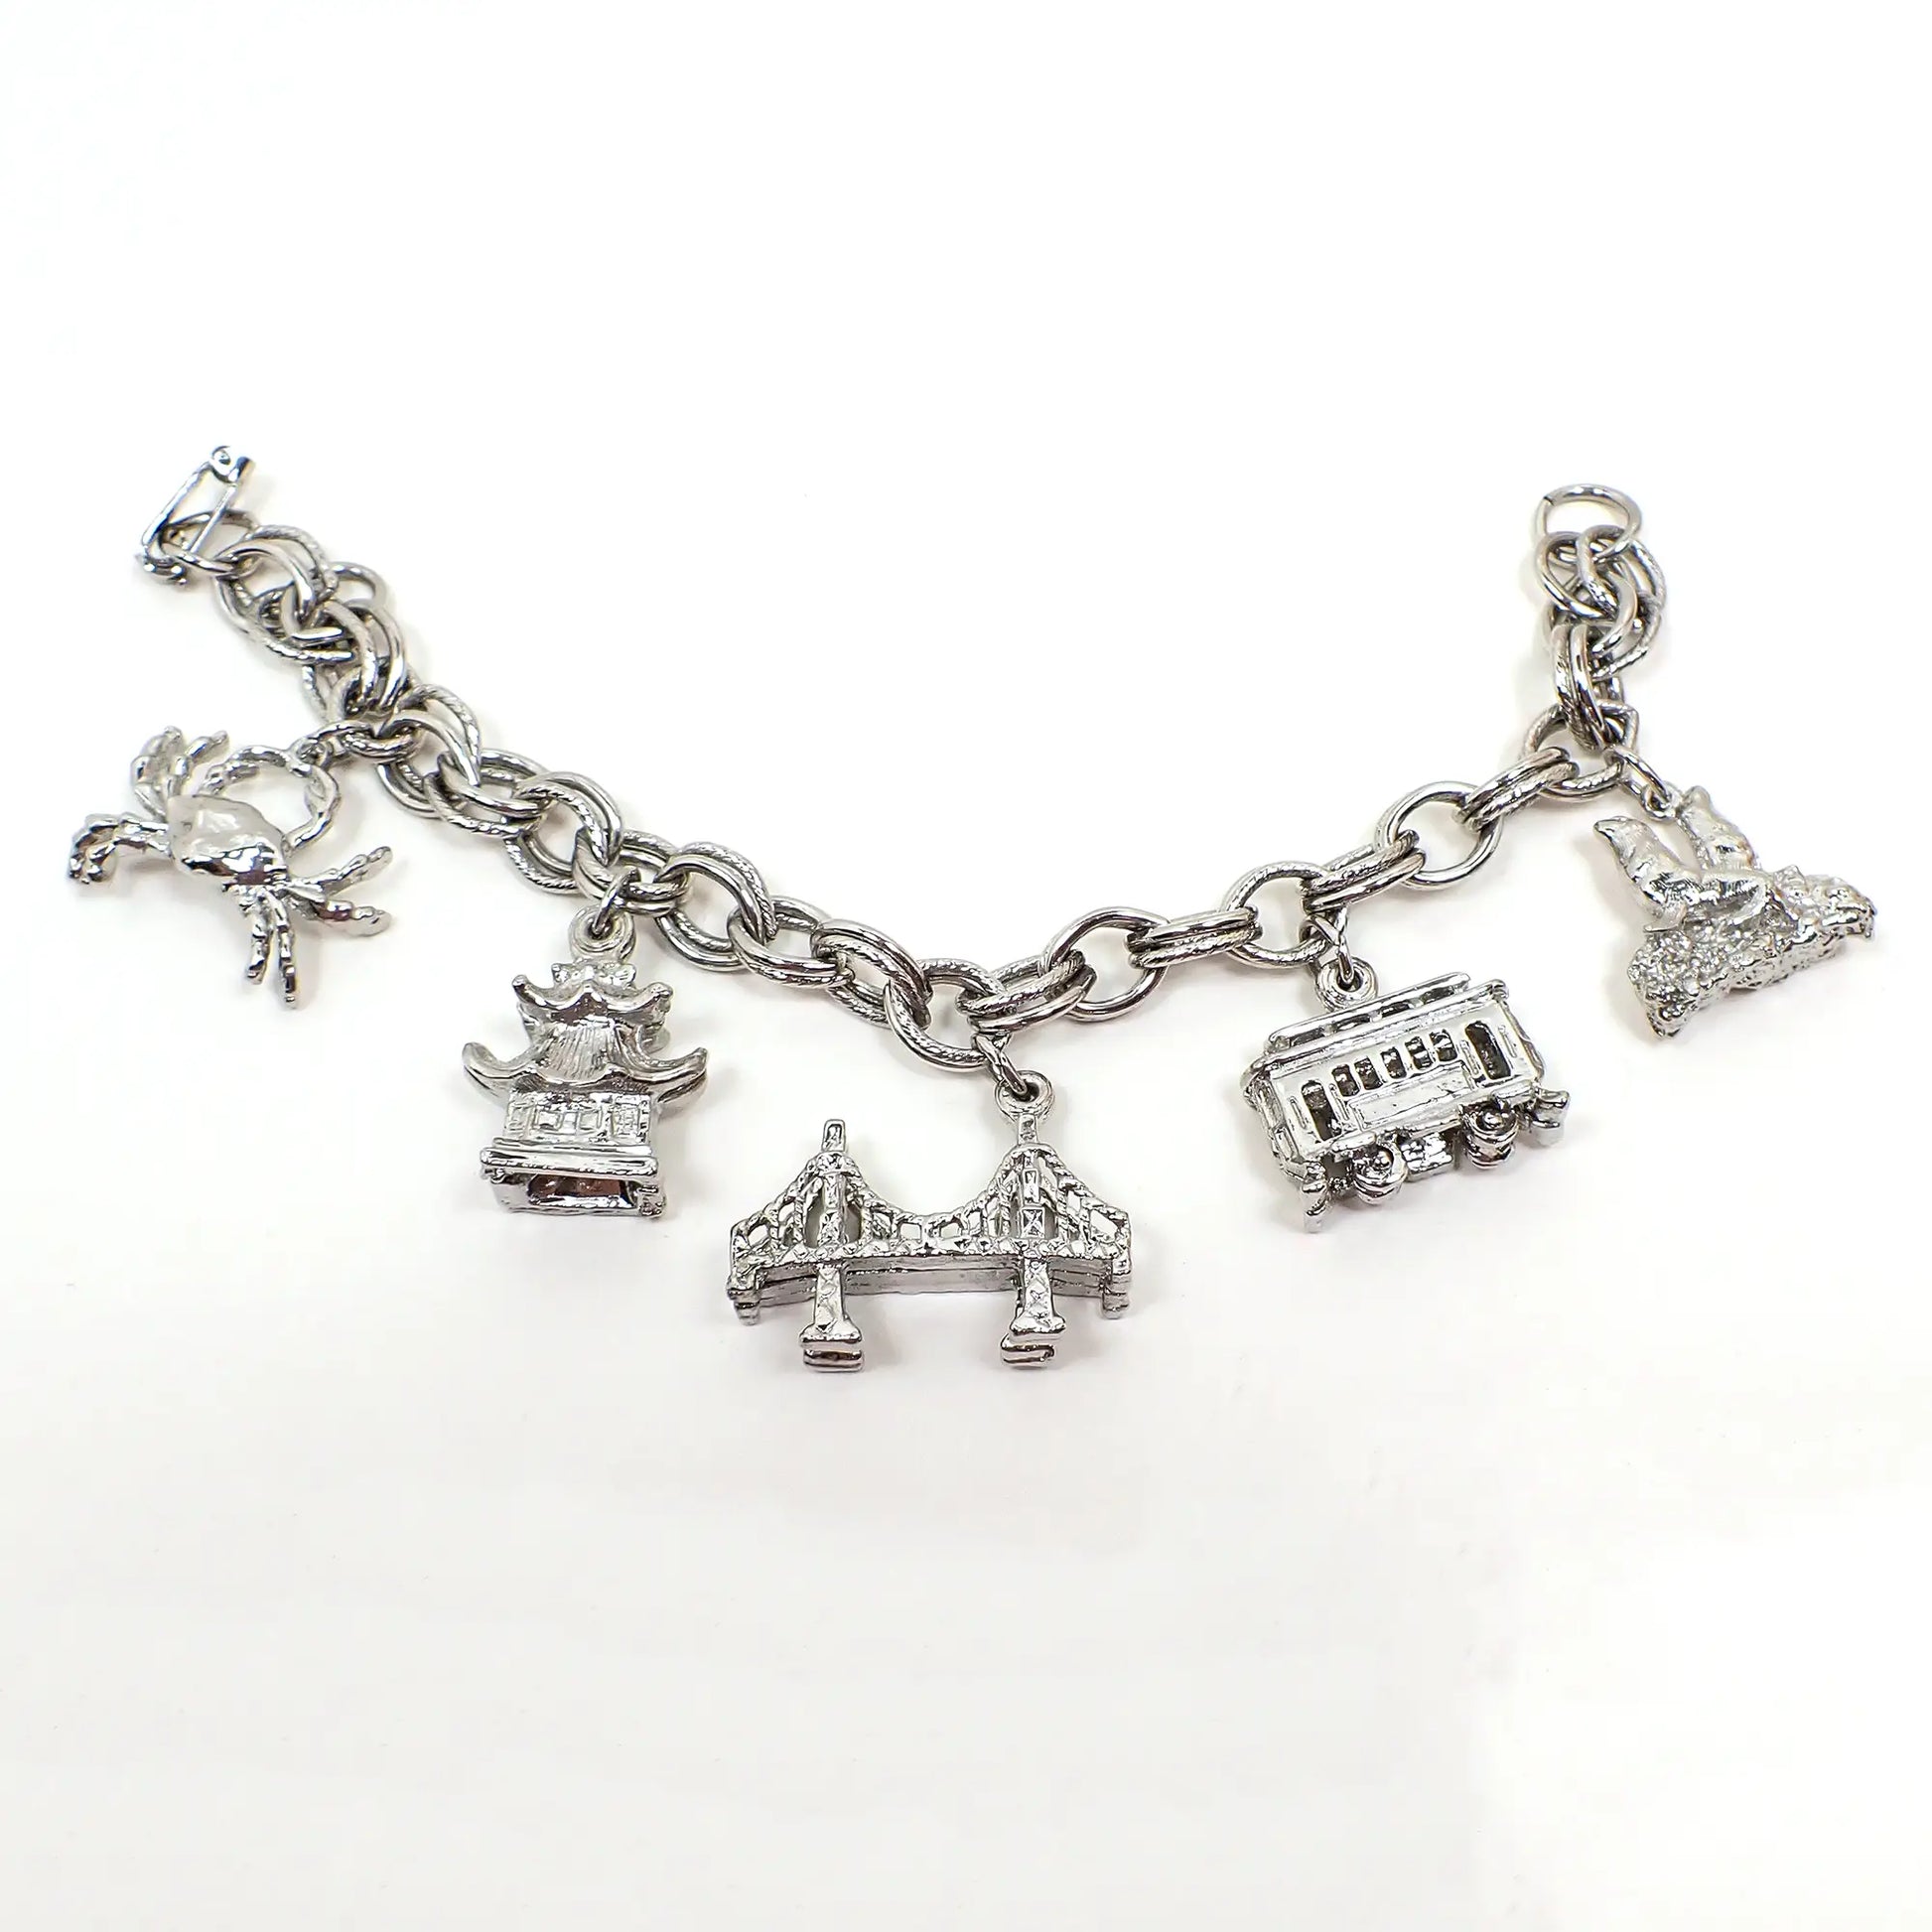 Side view of the retro vintage San Francisco charm bracelet. It's silver tone in color with a snap lock clasp. There are charms for a crab, China Town, Golden Gate Bride, cable car, and seals.